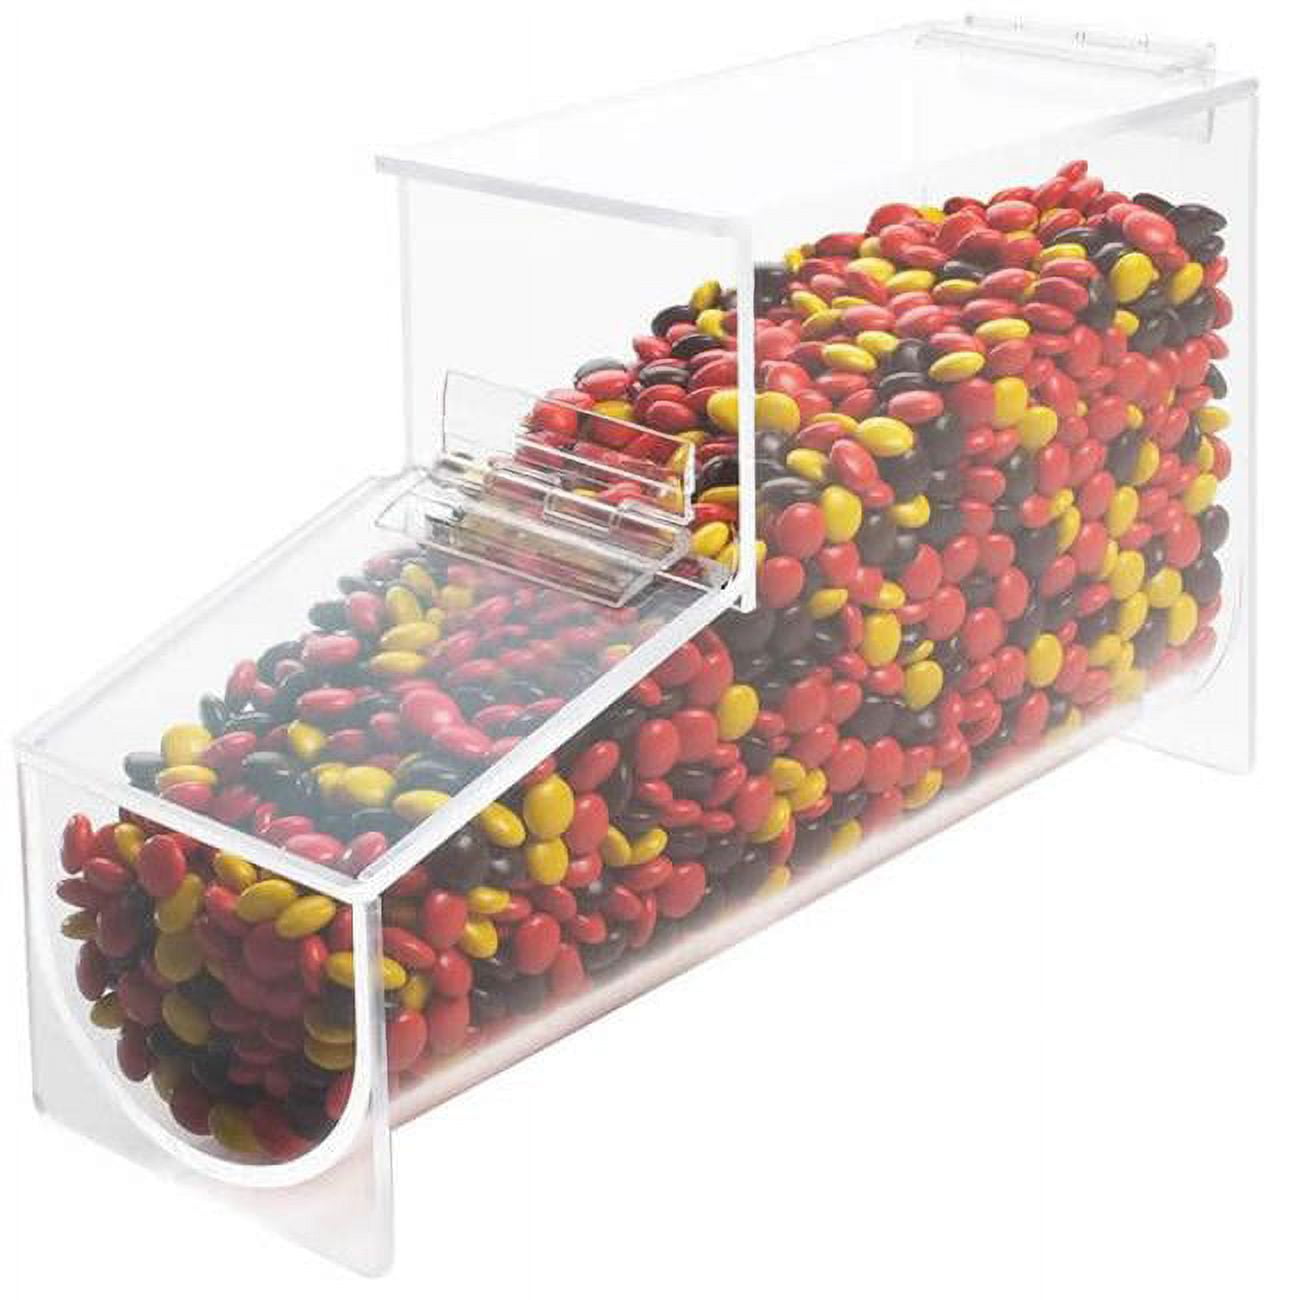 Picture of Cal Mil 1739 Classic Acrylic Topping Dispenser - 4.125 x 12 x 7 in.